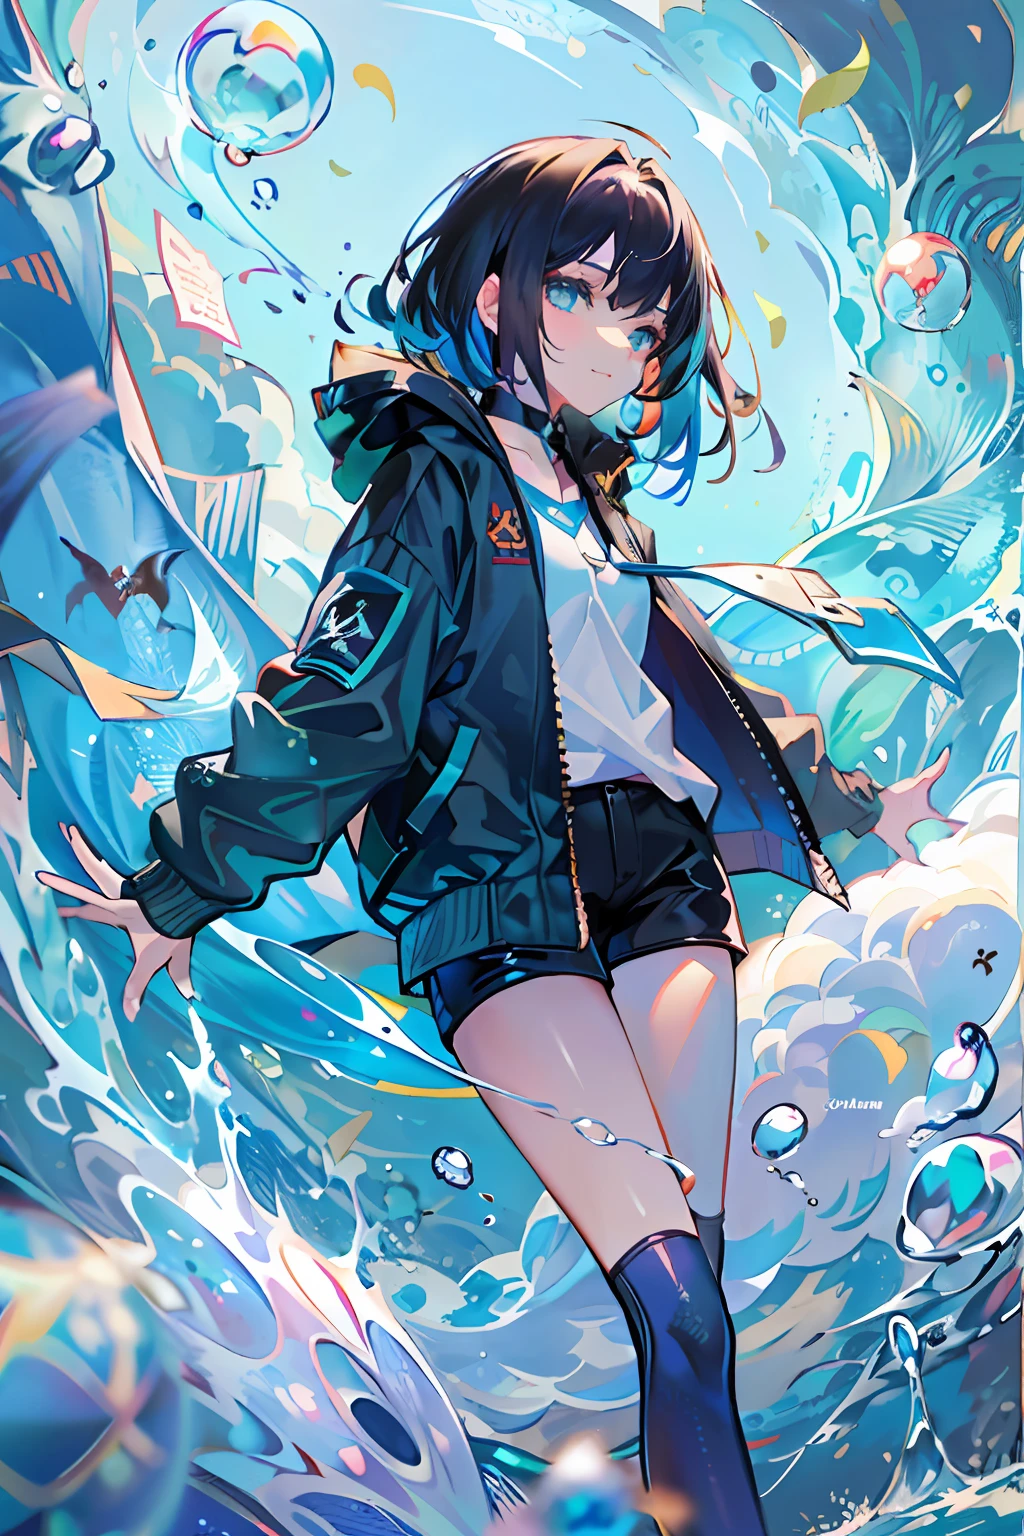 ((top-quality)), ((​masterpiece)), ((Ultra-detail)), (extremely delicate and beautiful), girl with, solo, cold attitude,((Black jacket)),She is very(relax)with  the(Settled down)Looks,A darK-haired, depth of fields,evil smile,Bubble, under the water, Air bubble,bright light blue eyes,Inner color with black hair and light blue tips,Cold background,Bob Hair - Linear Art, shortpants、knee high socks、Camisole inner shirt